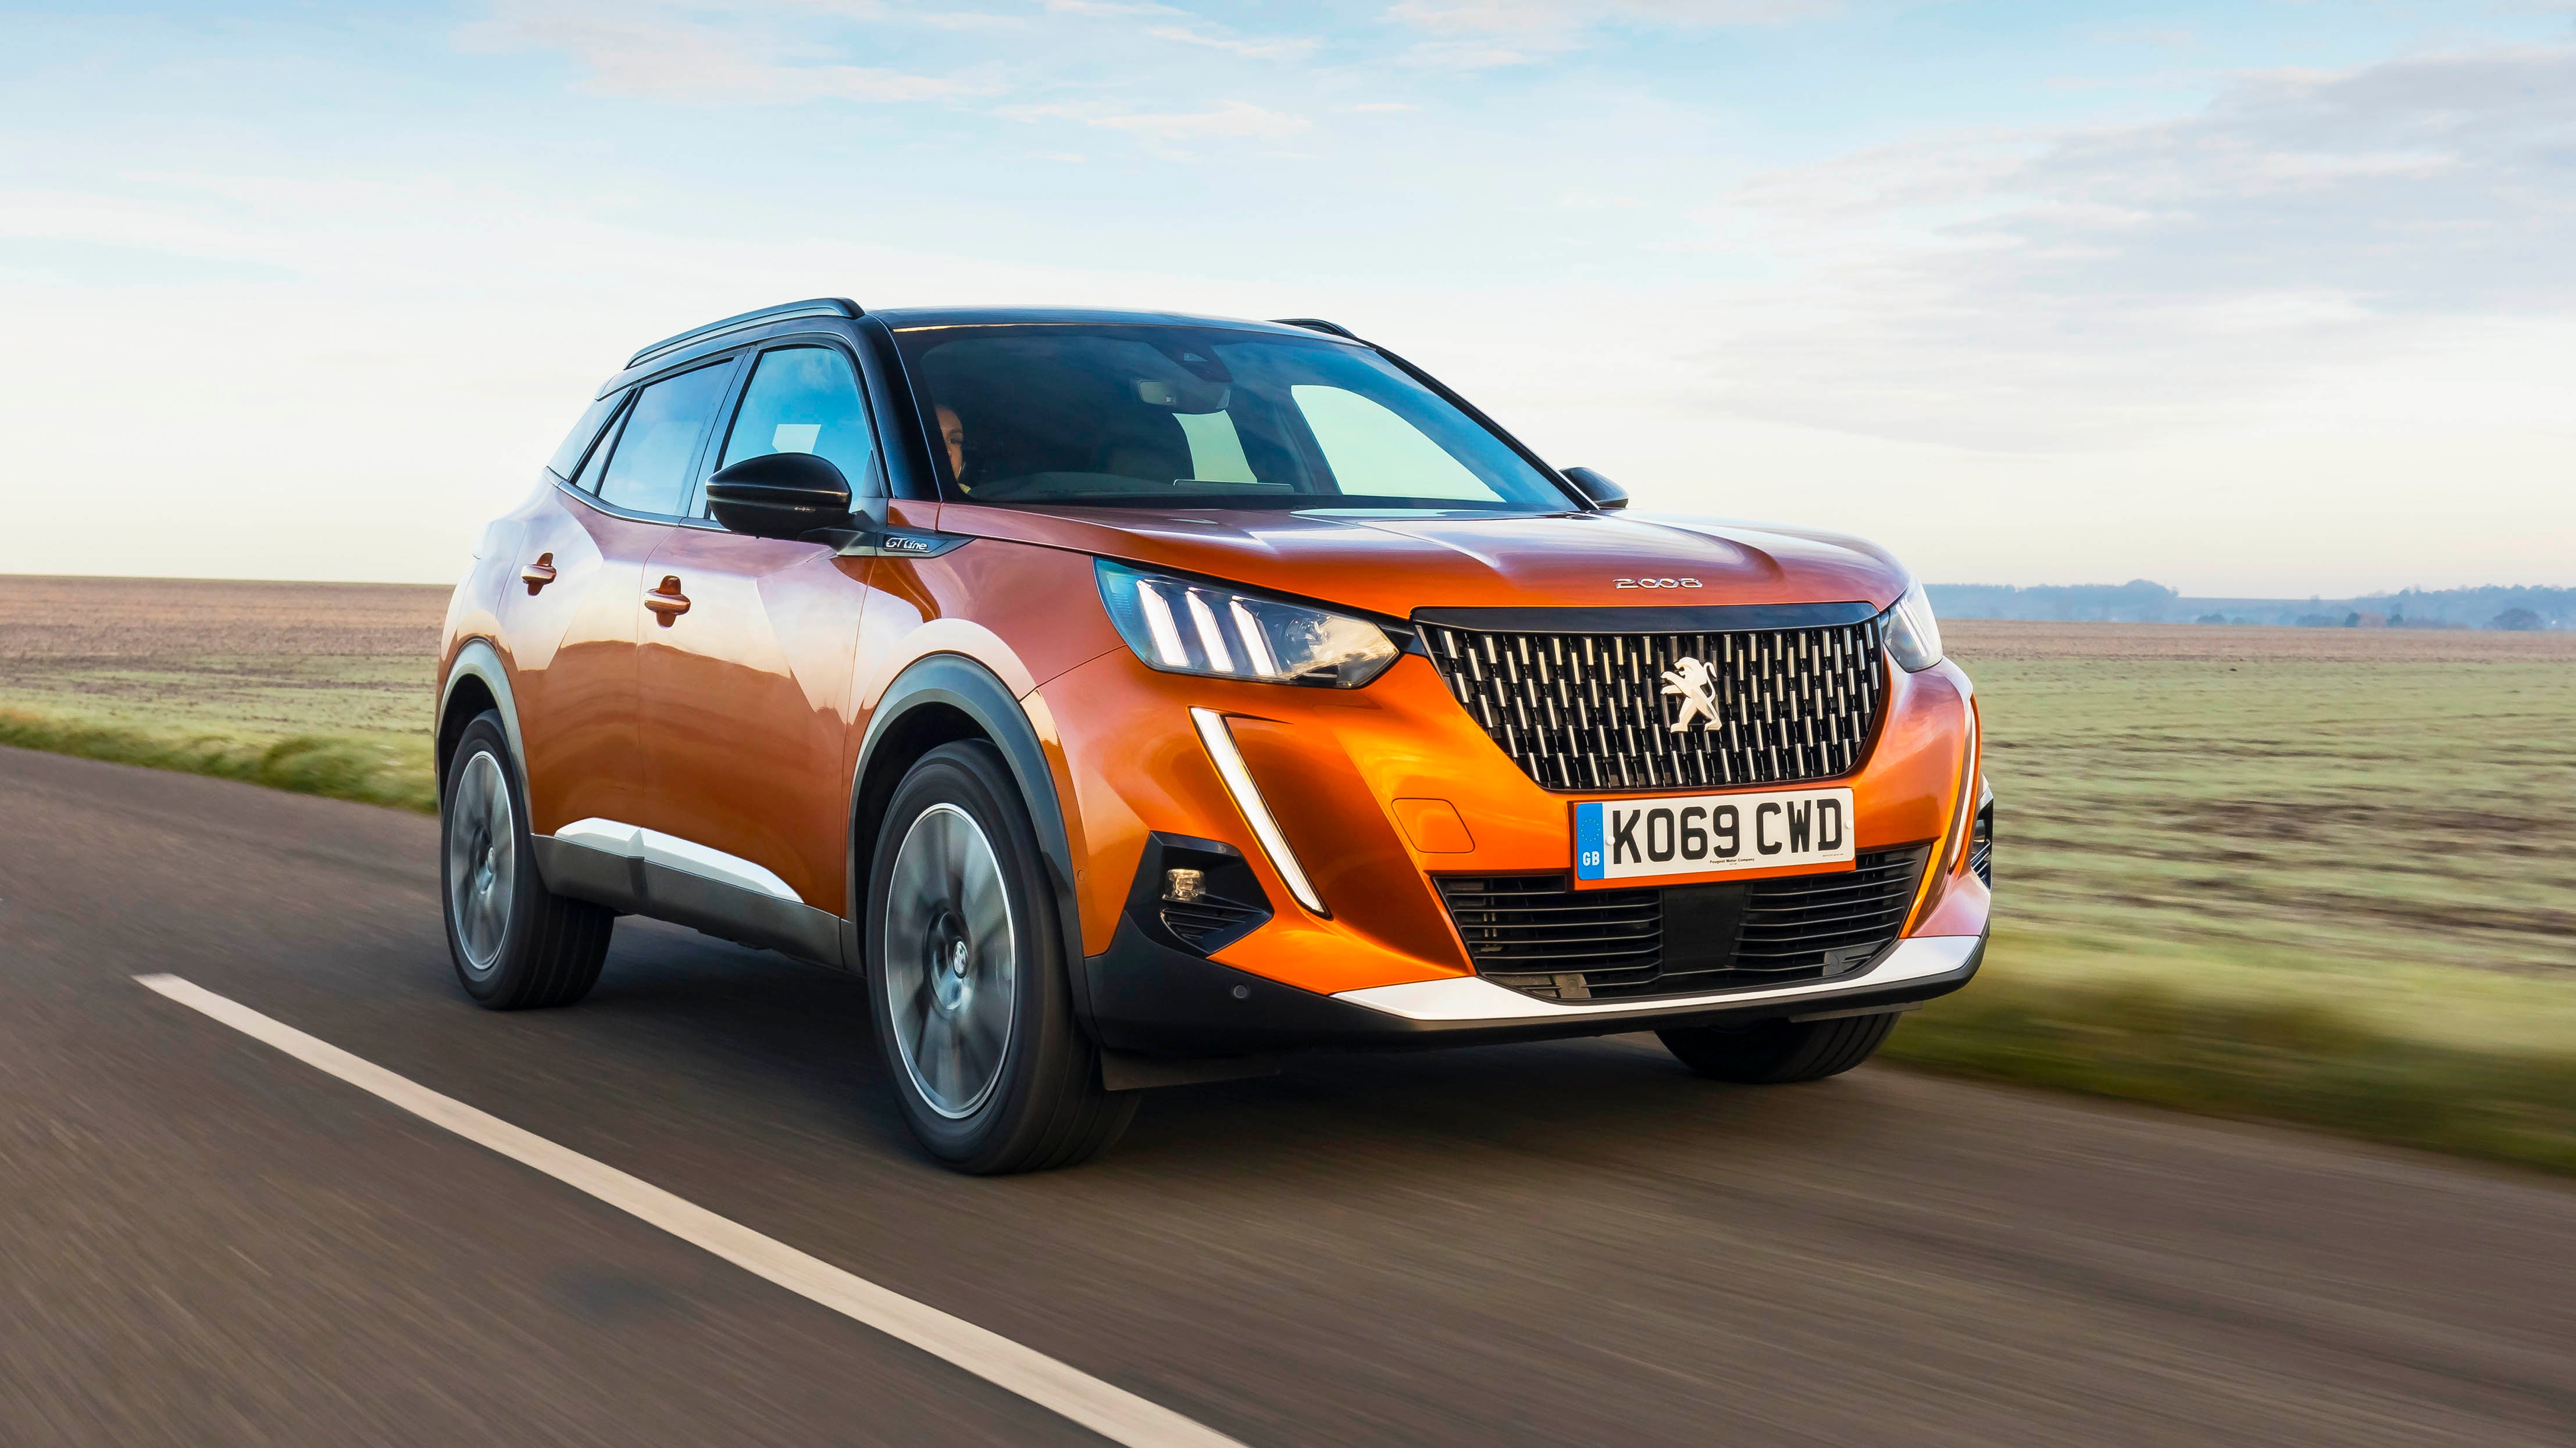 Peugeot 2008 2019 reviews, technical data, prices